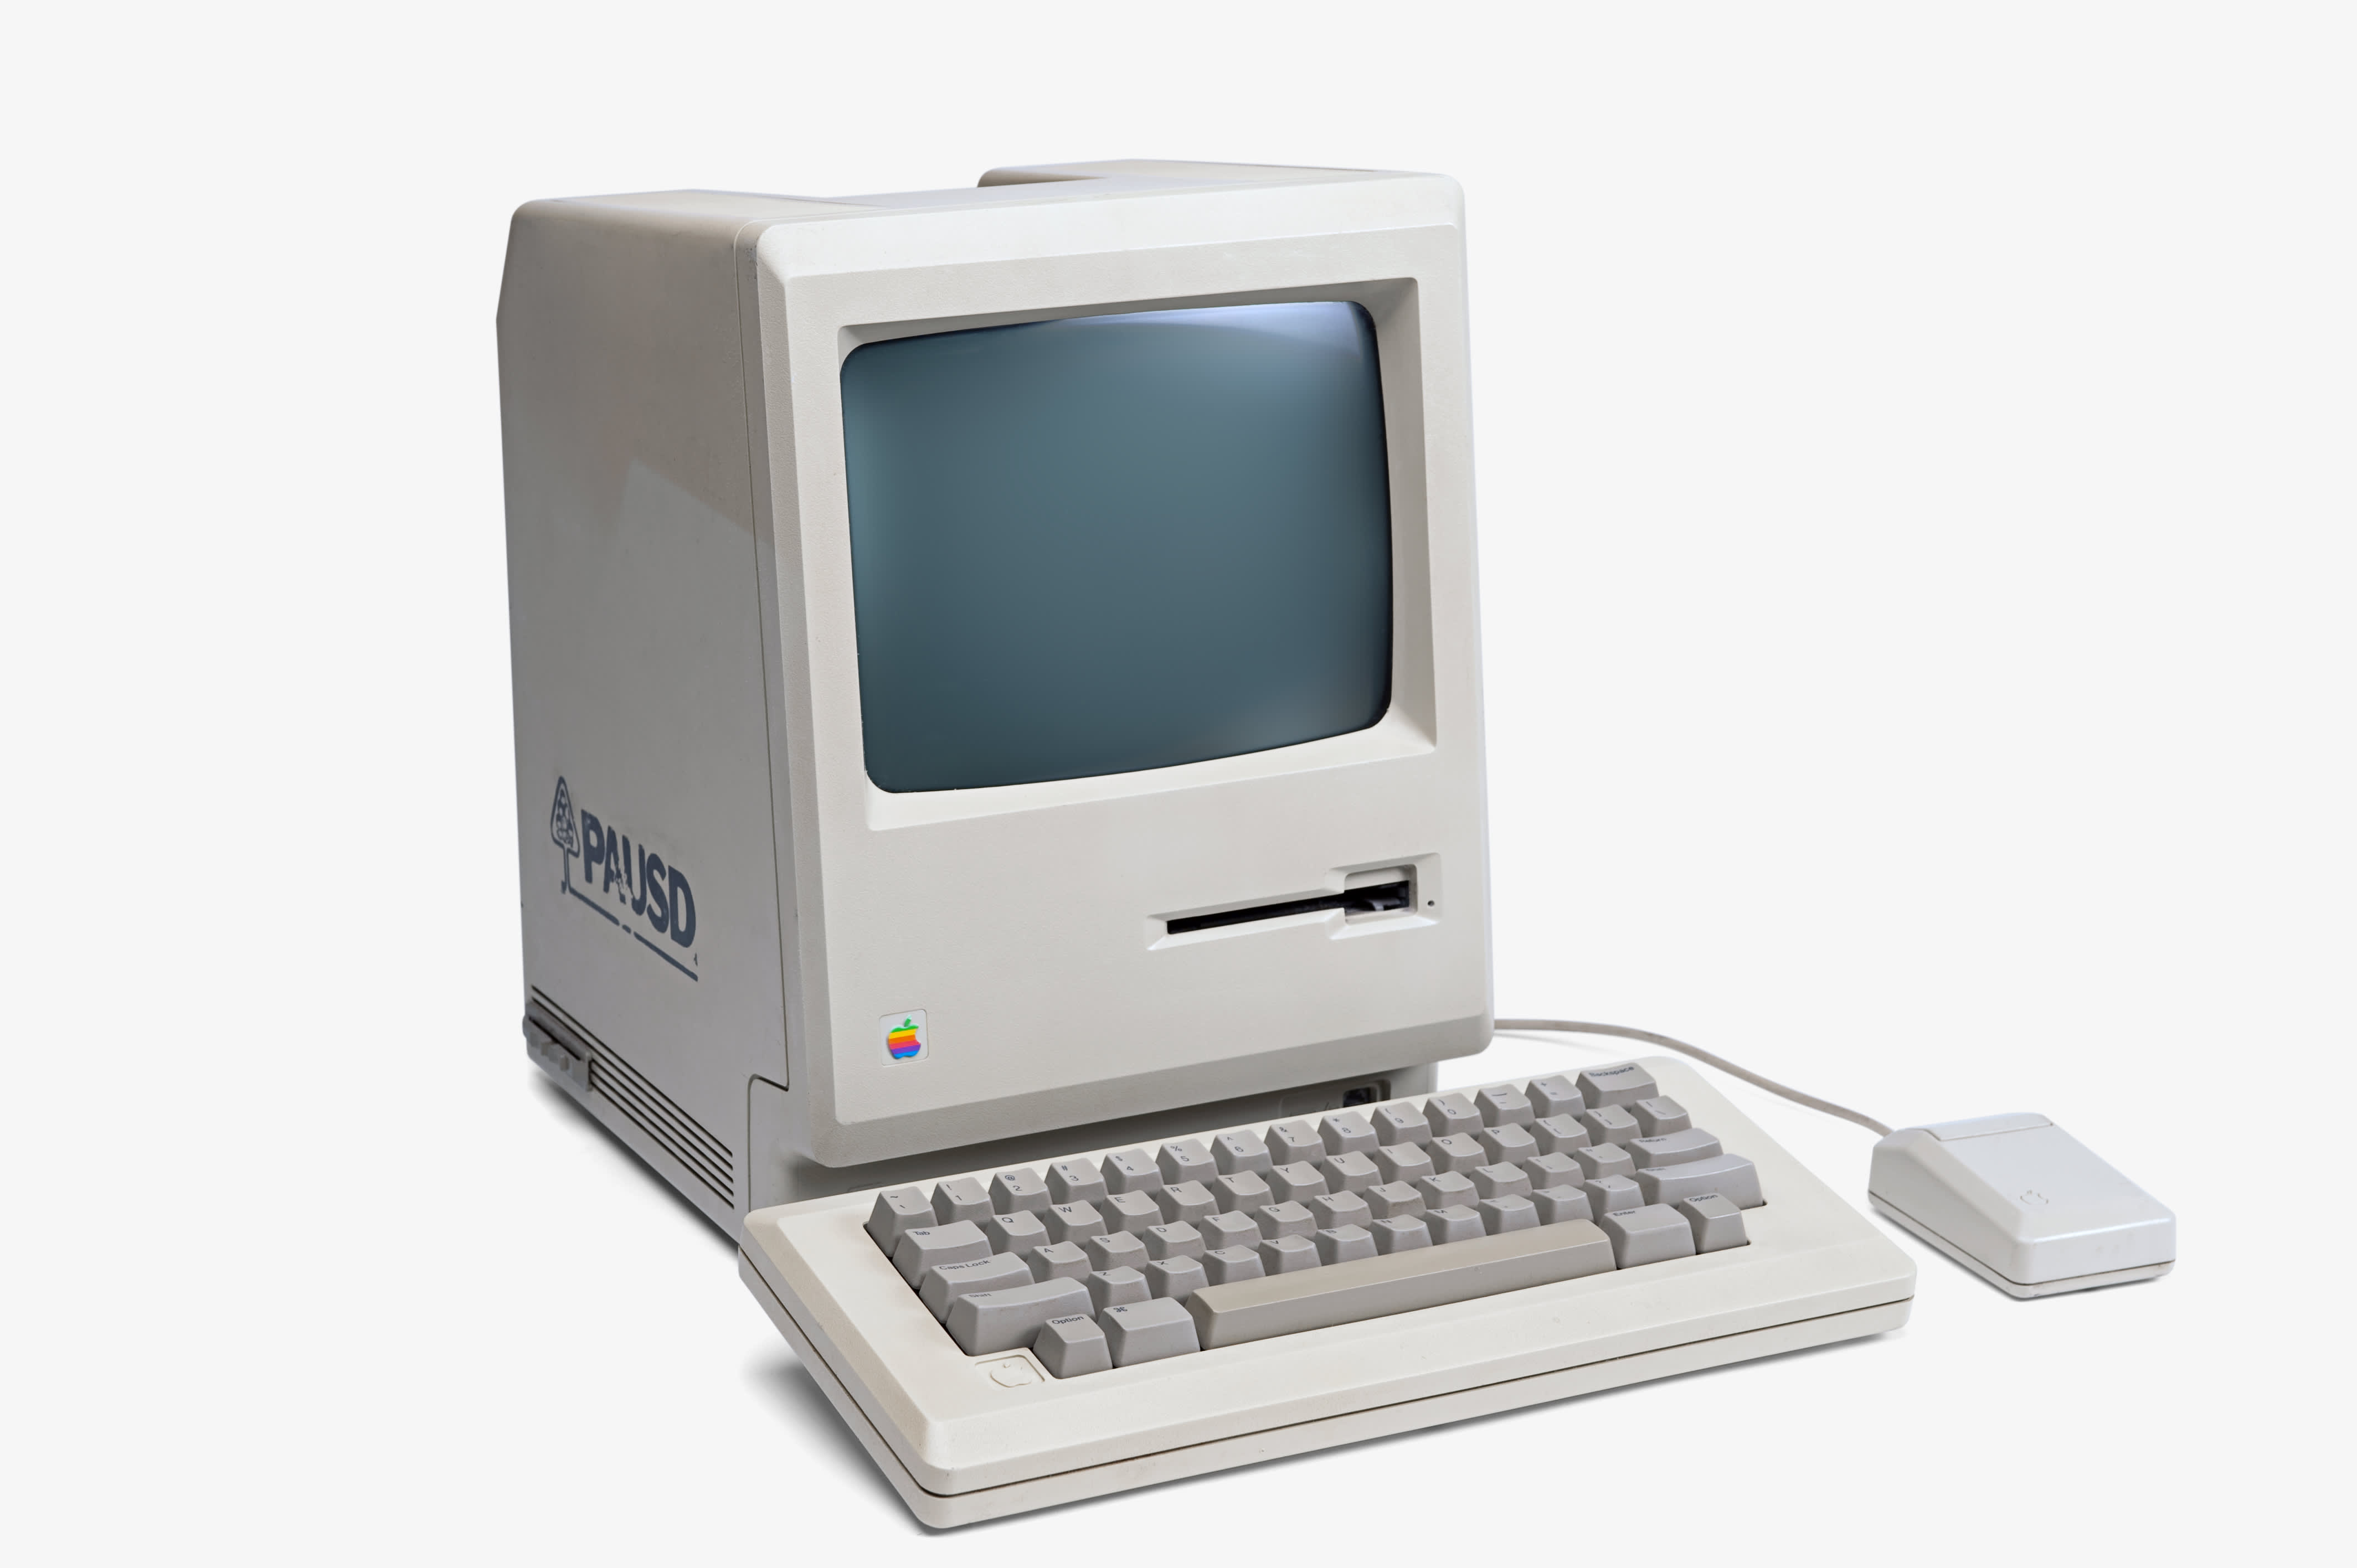 Photos: Fully functional Apple-1 computer from 1976 is up for auction